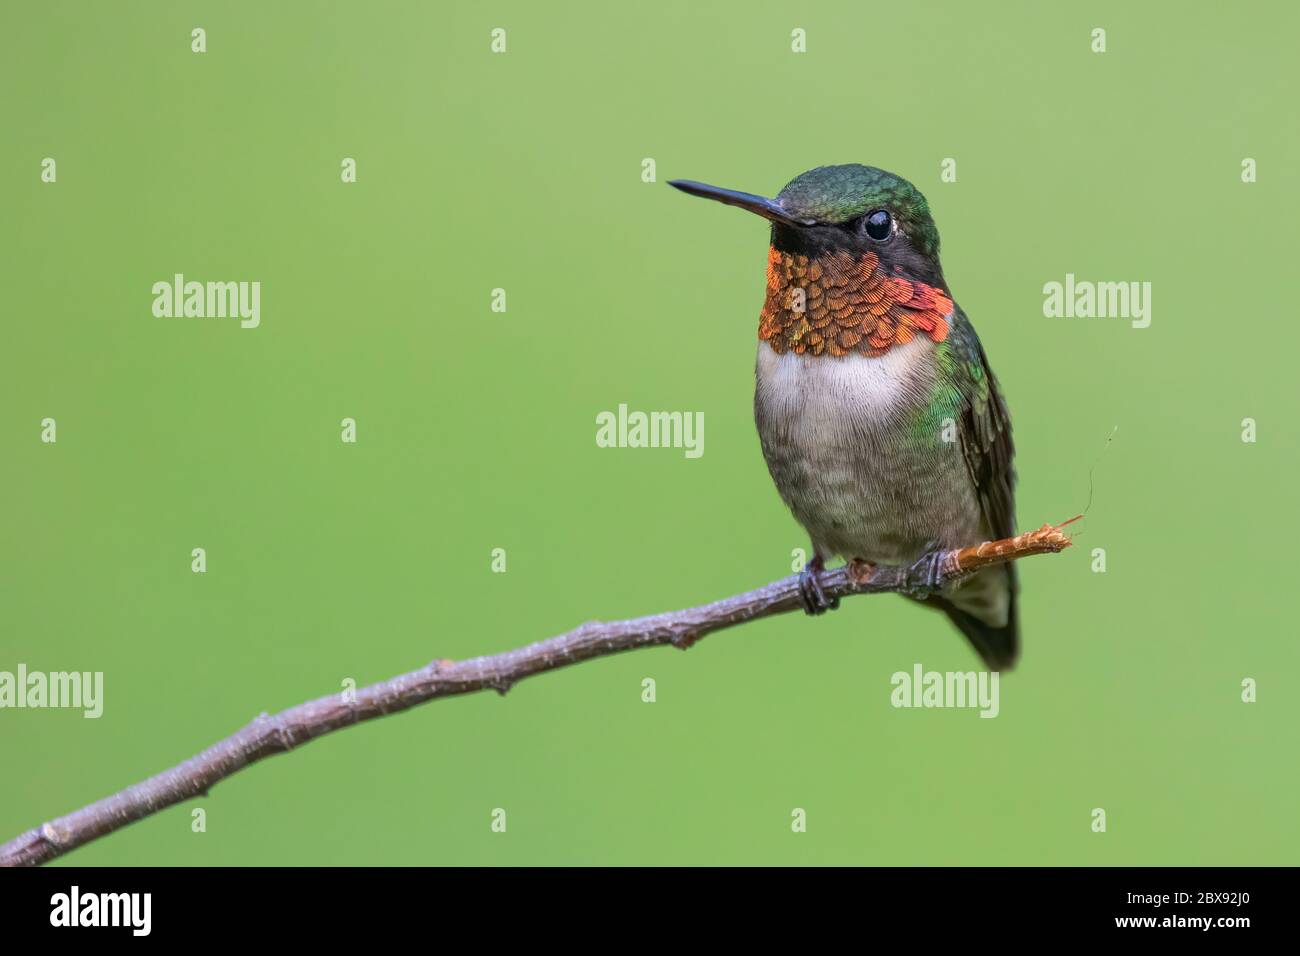 Ruby-throated hummingbird perched Stock Photo